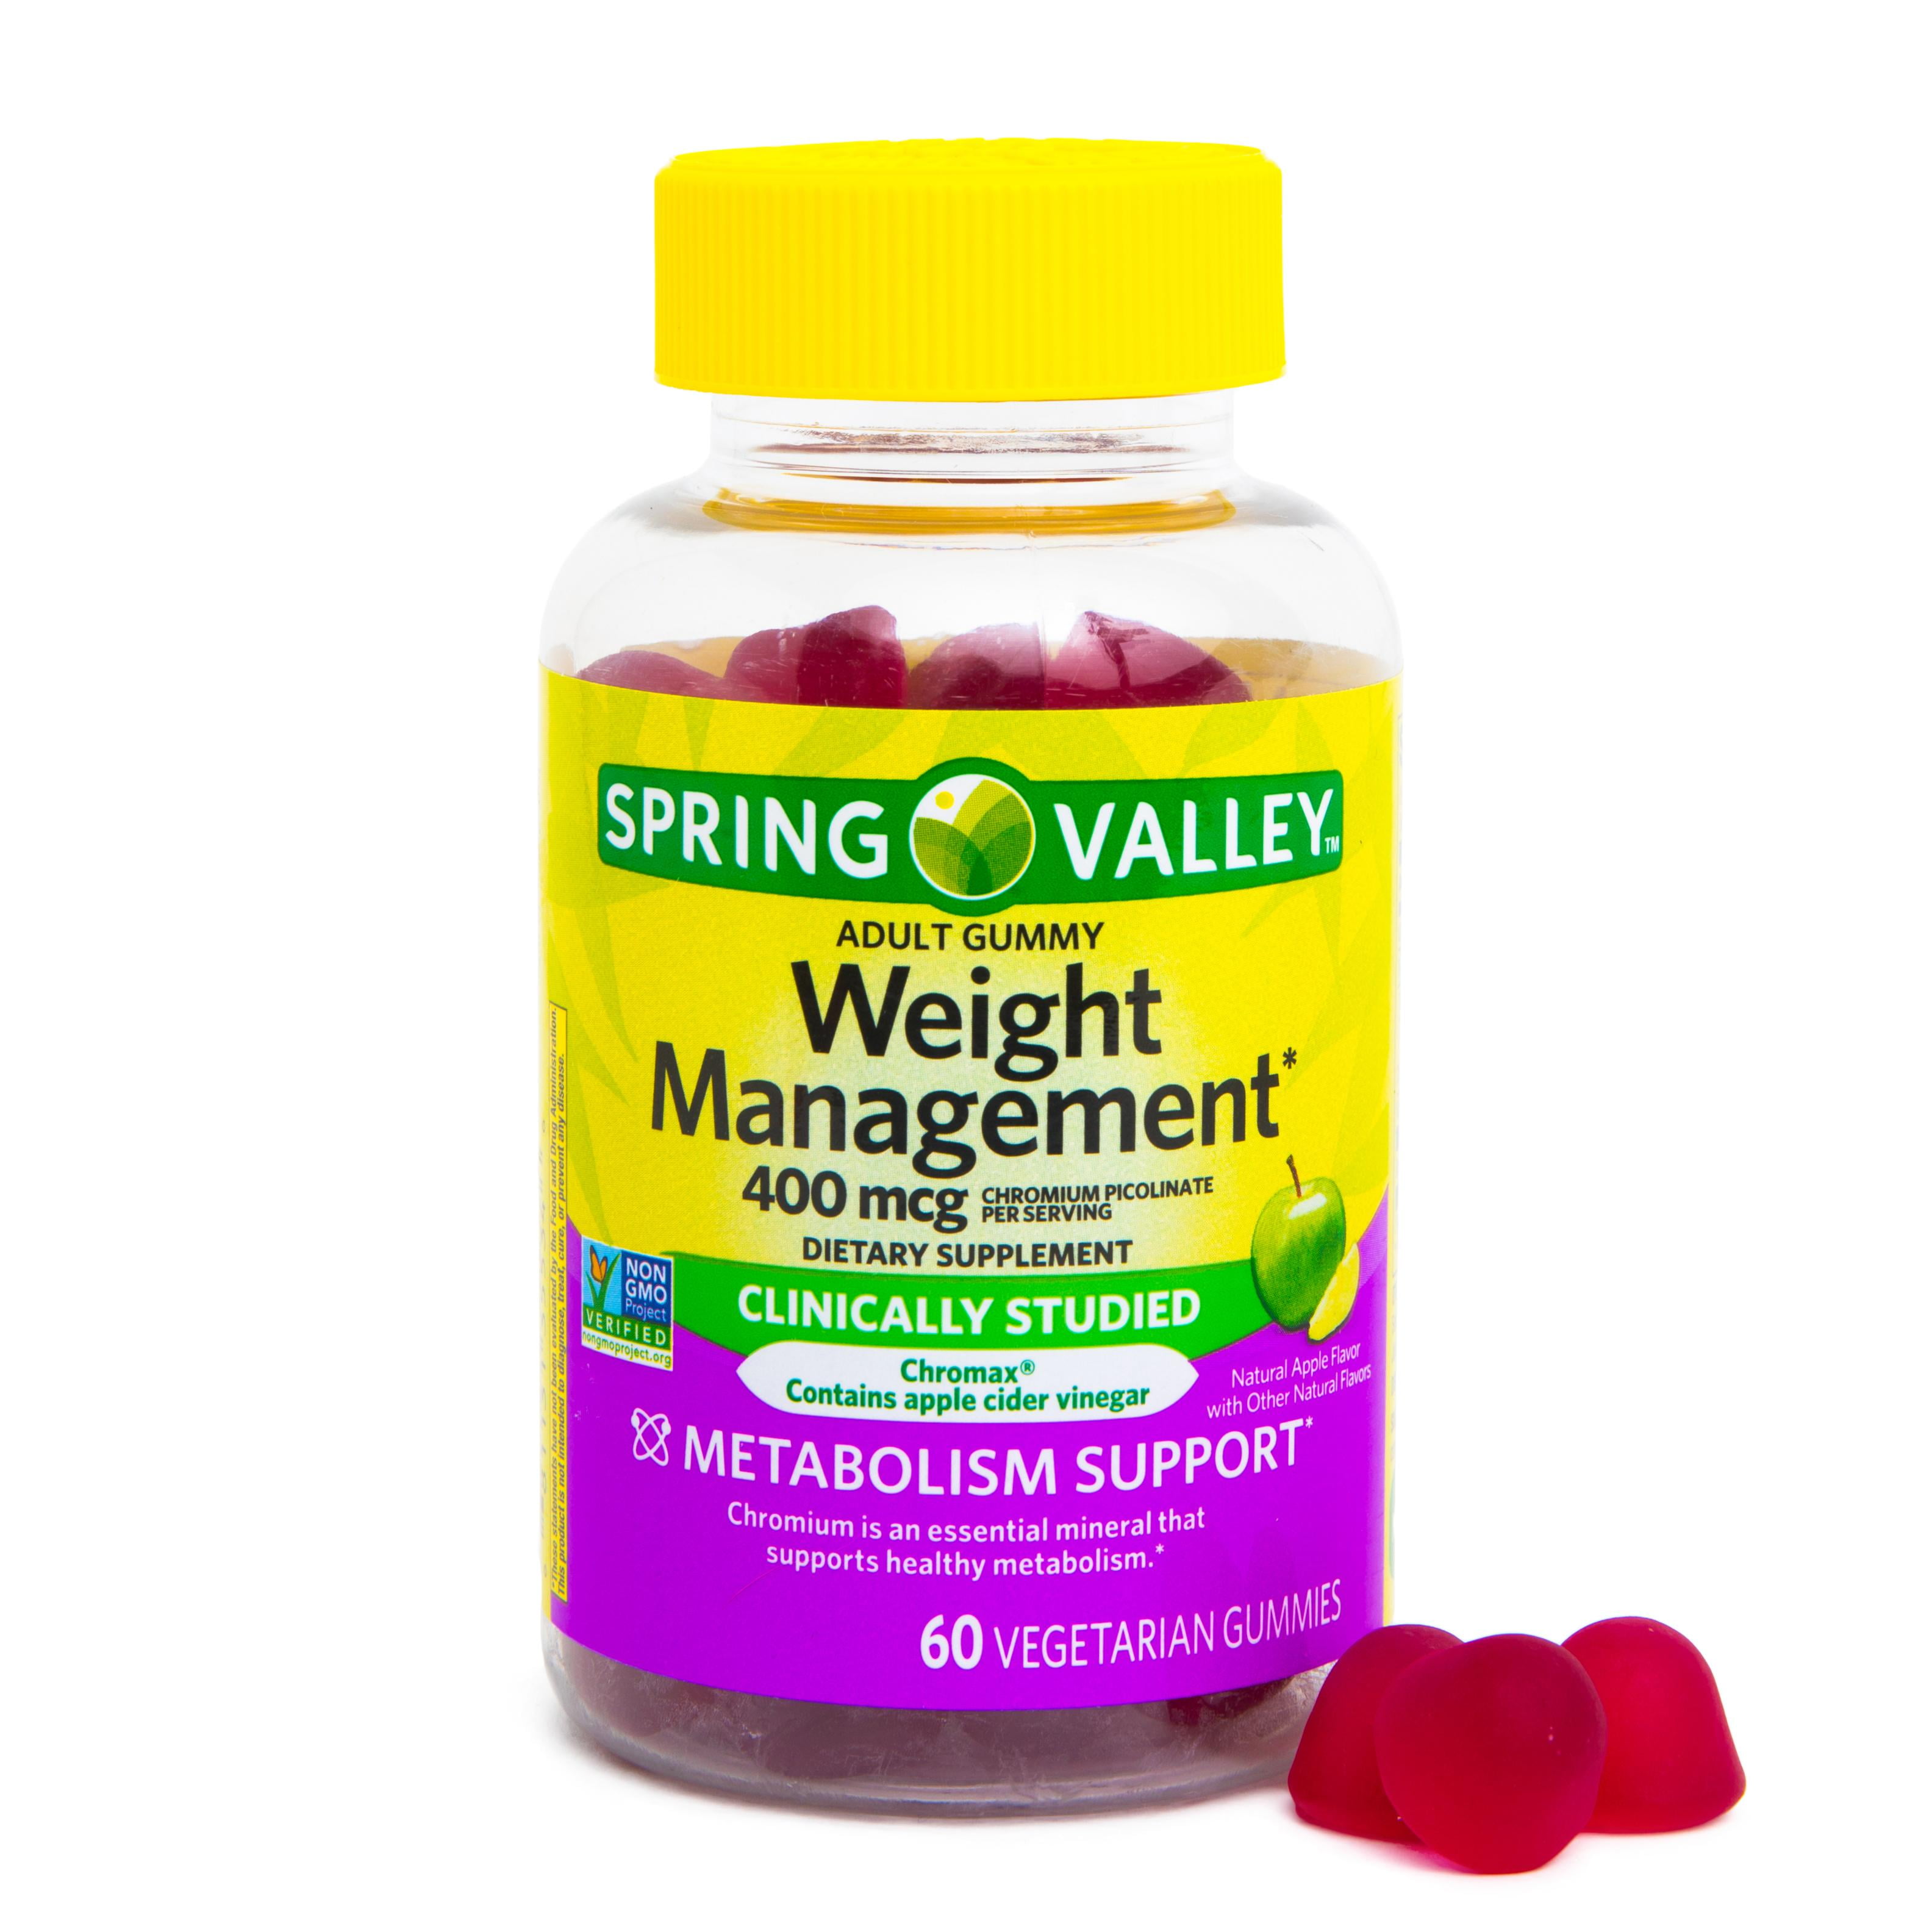 Vitamins for weight management